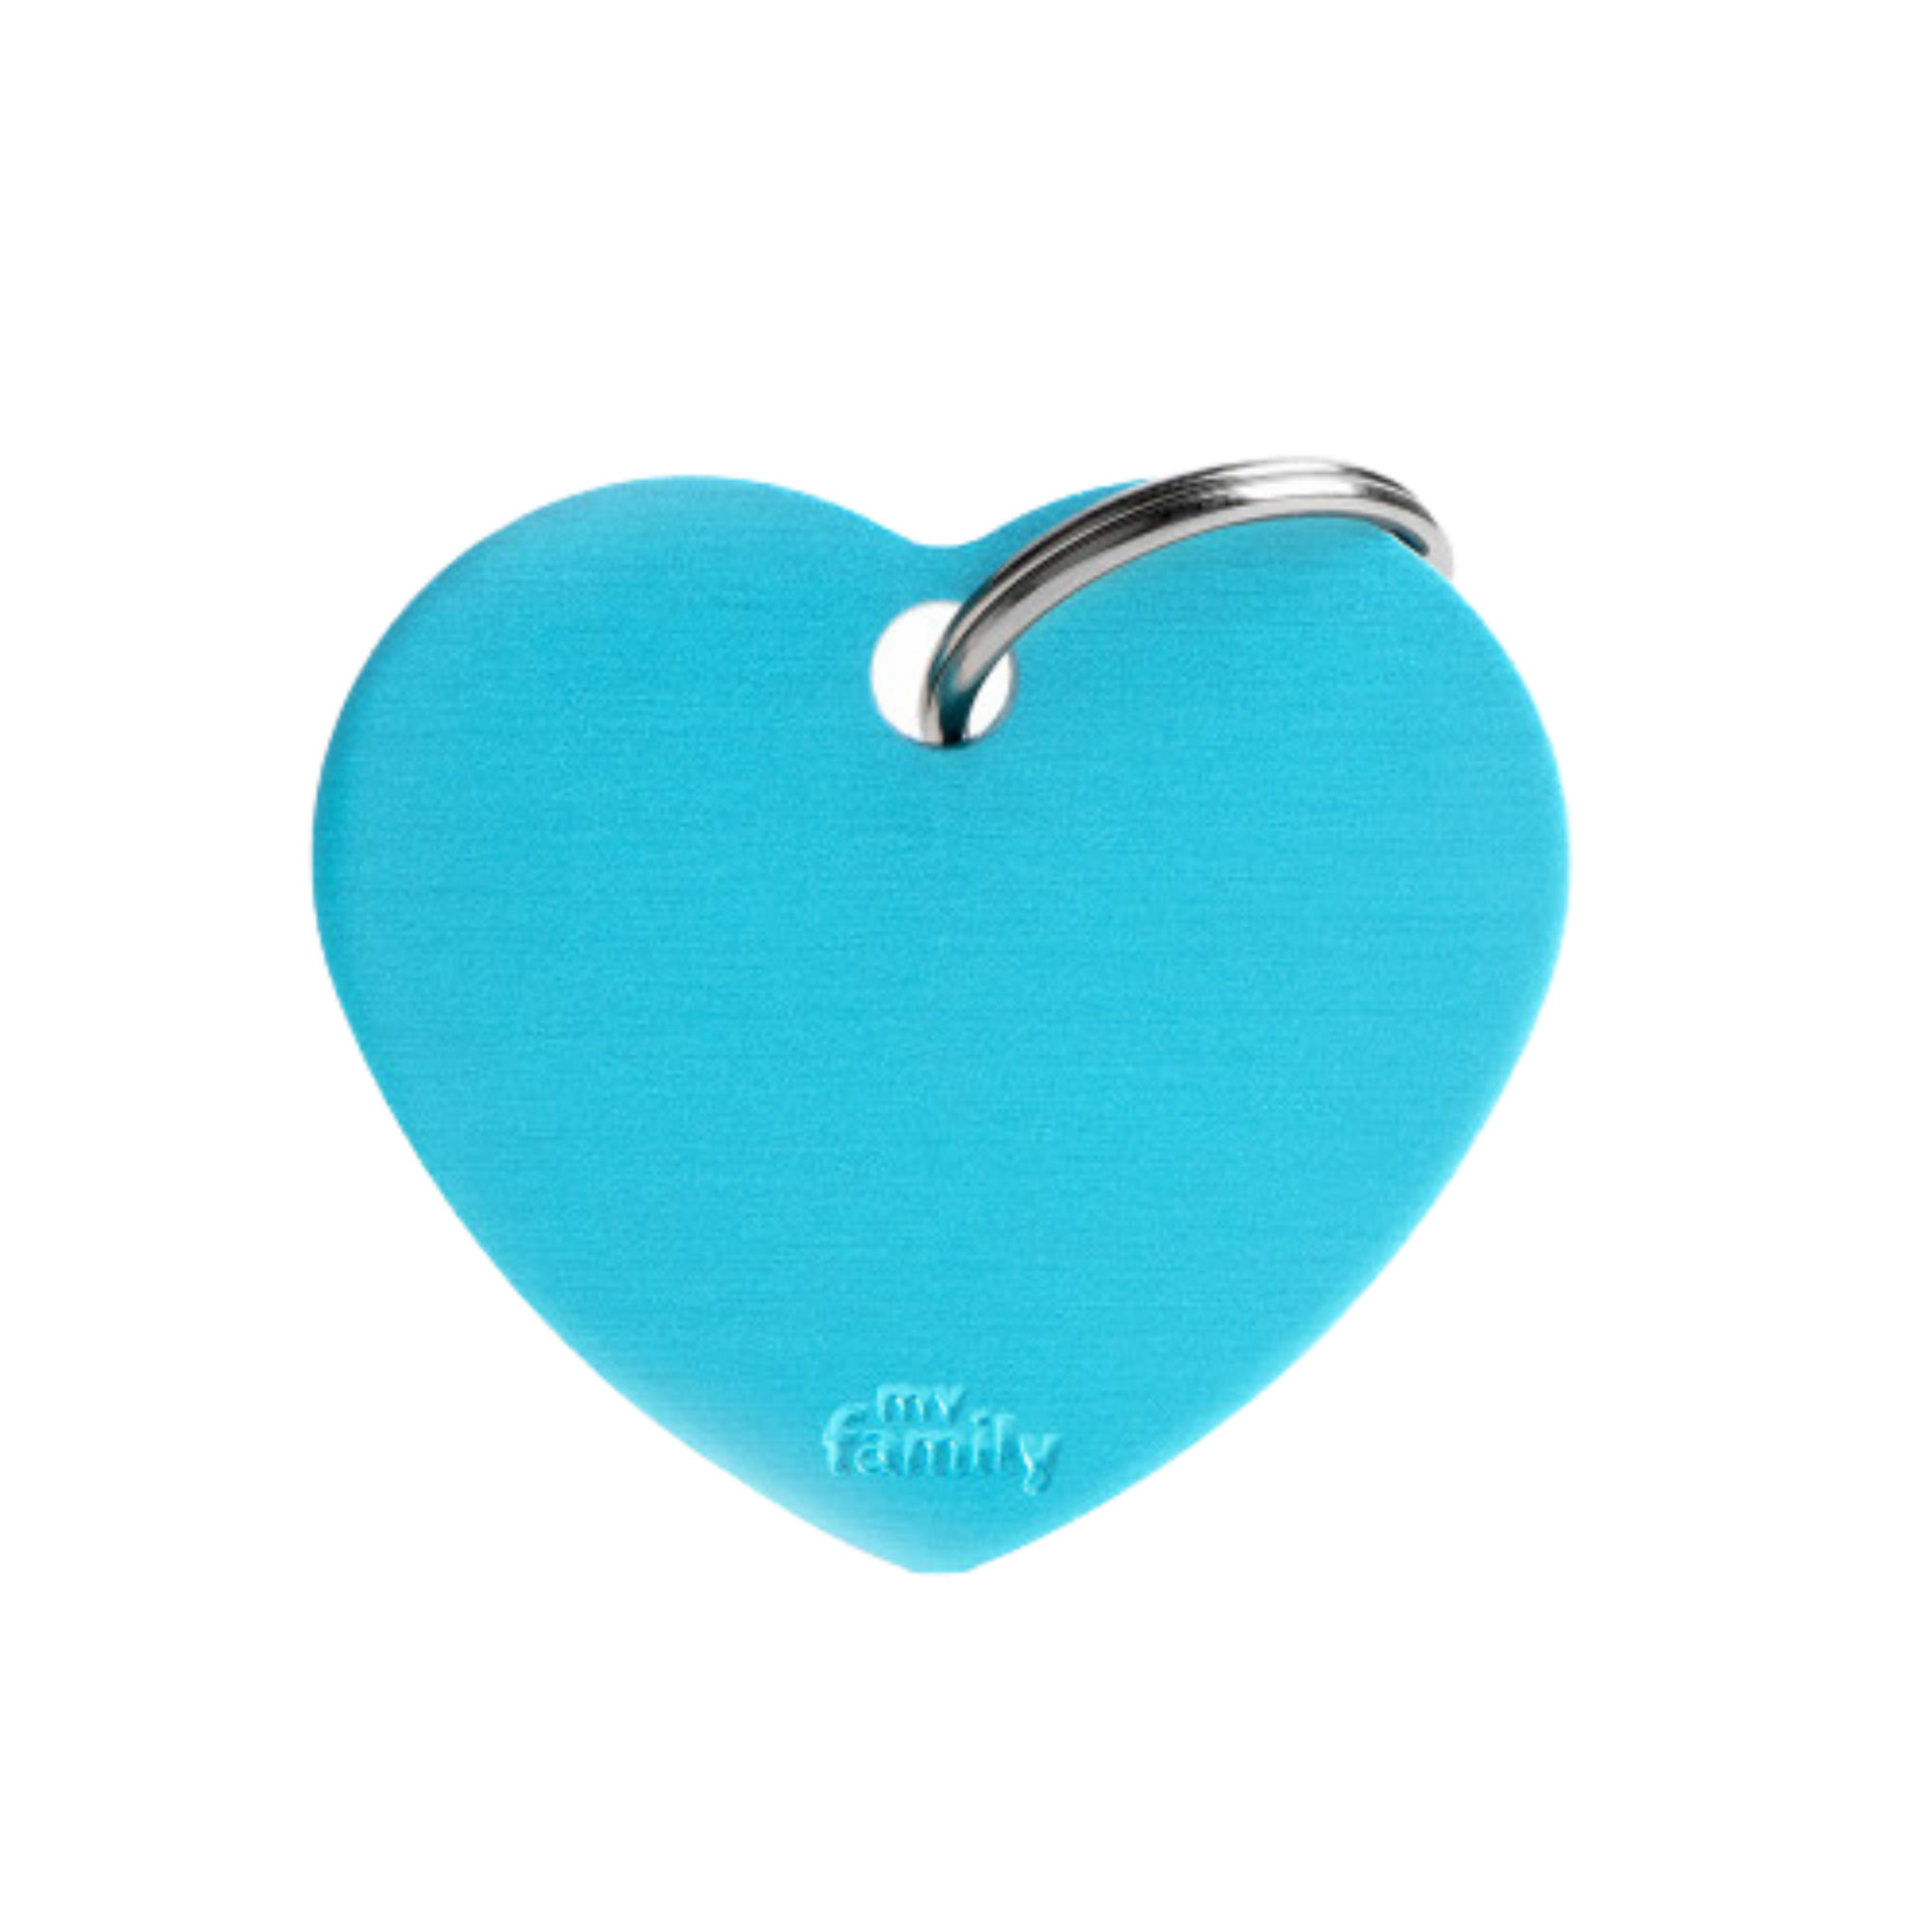 MyFamily Heart Tag Aluminum Light Blue - Mutts & Co.